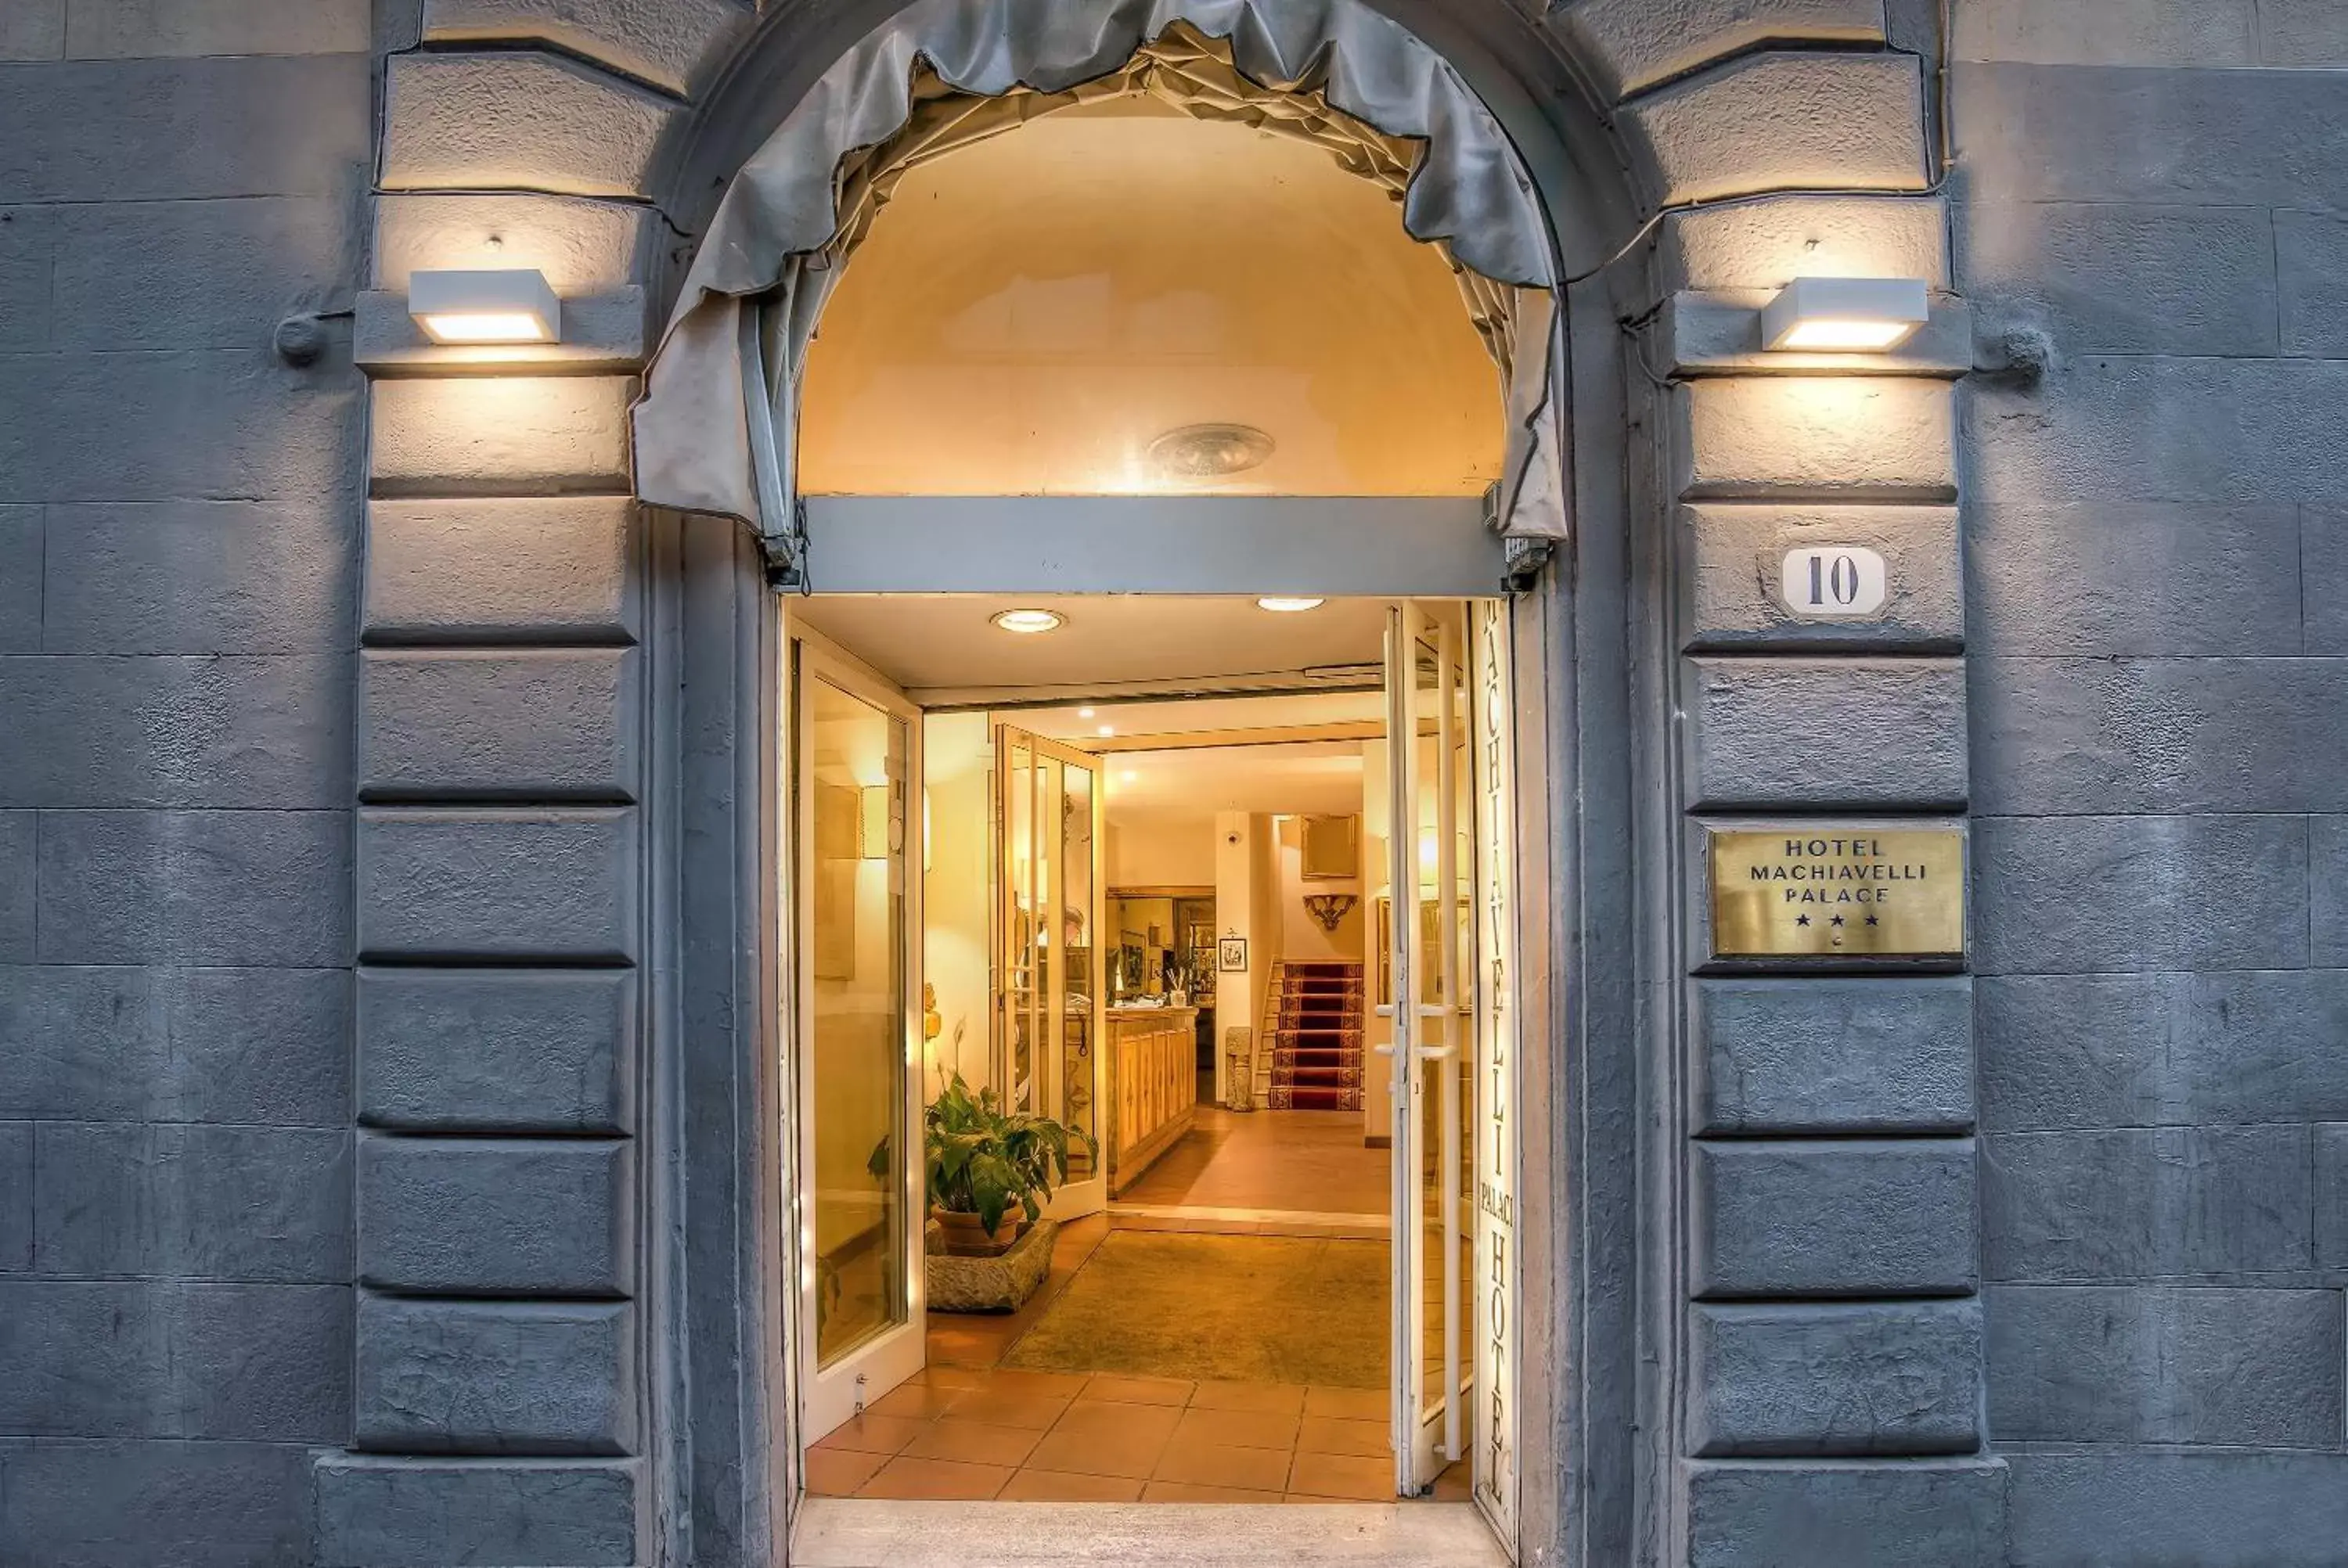 Property building, Facade/Entrance in Hotel Machiavelli Palace